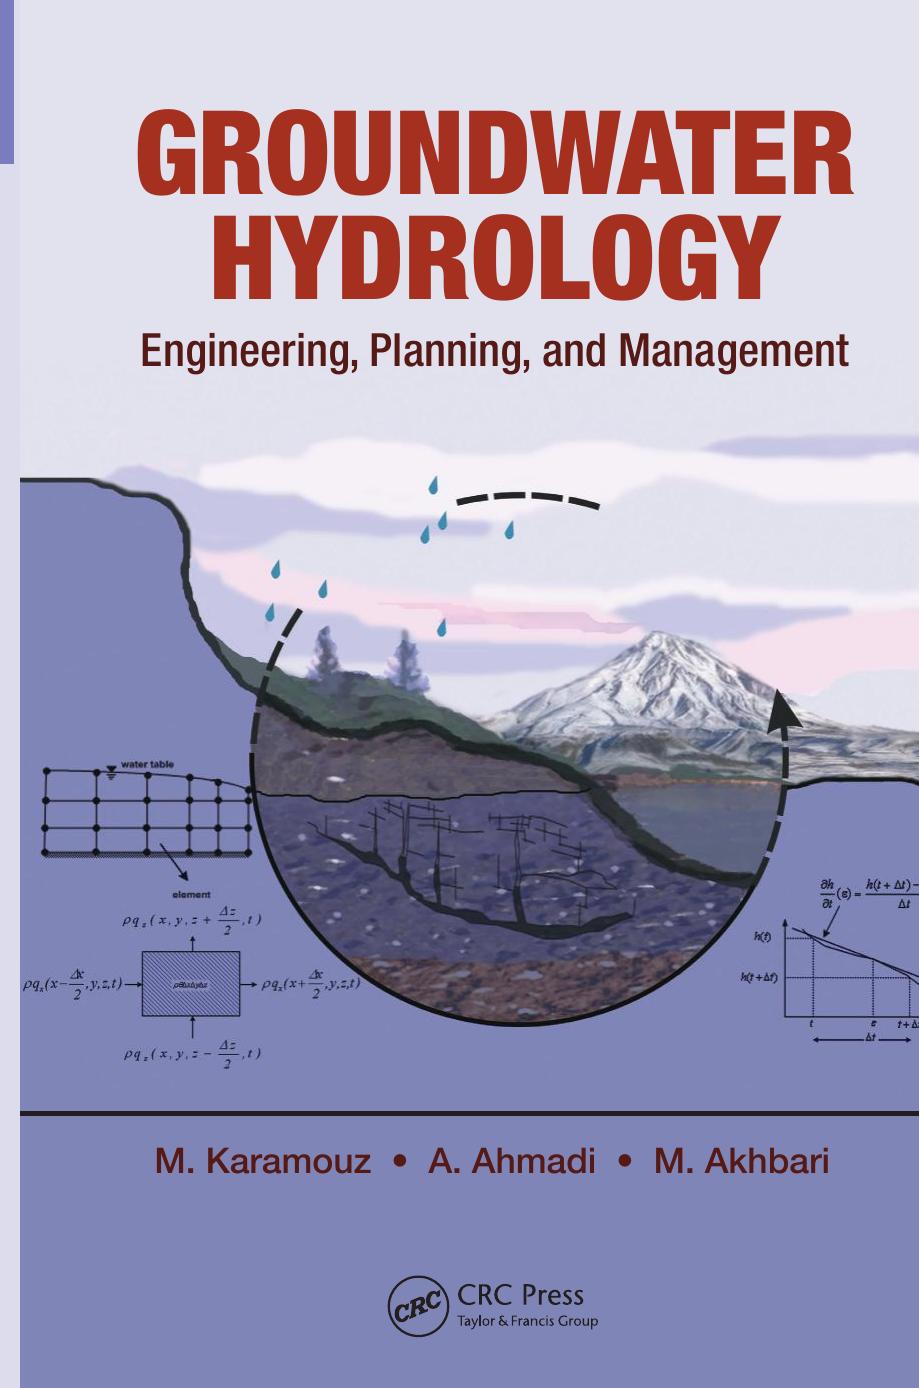 Groundwater Hydrology Engineering, Planning, and Management 2011